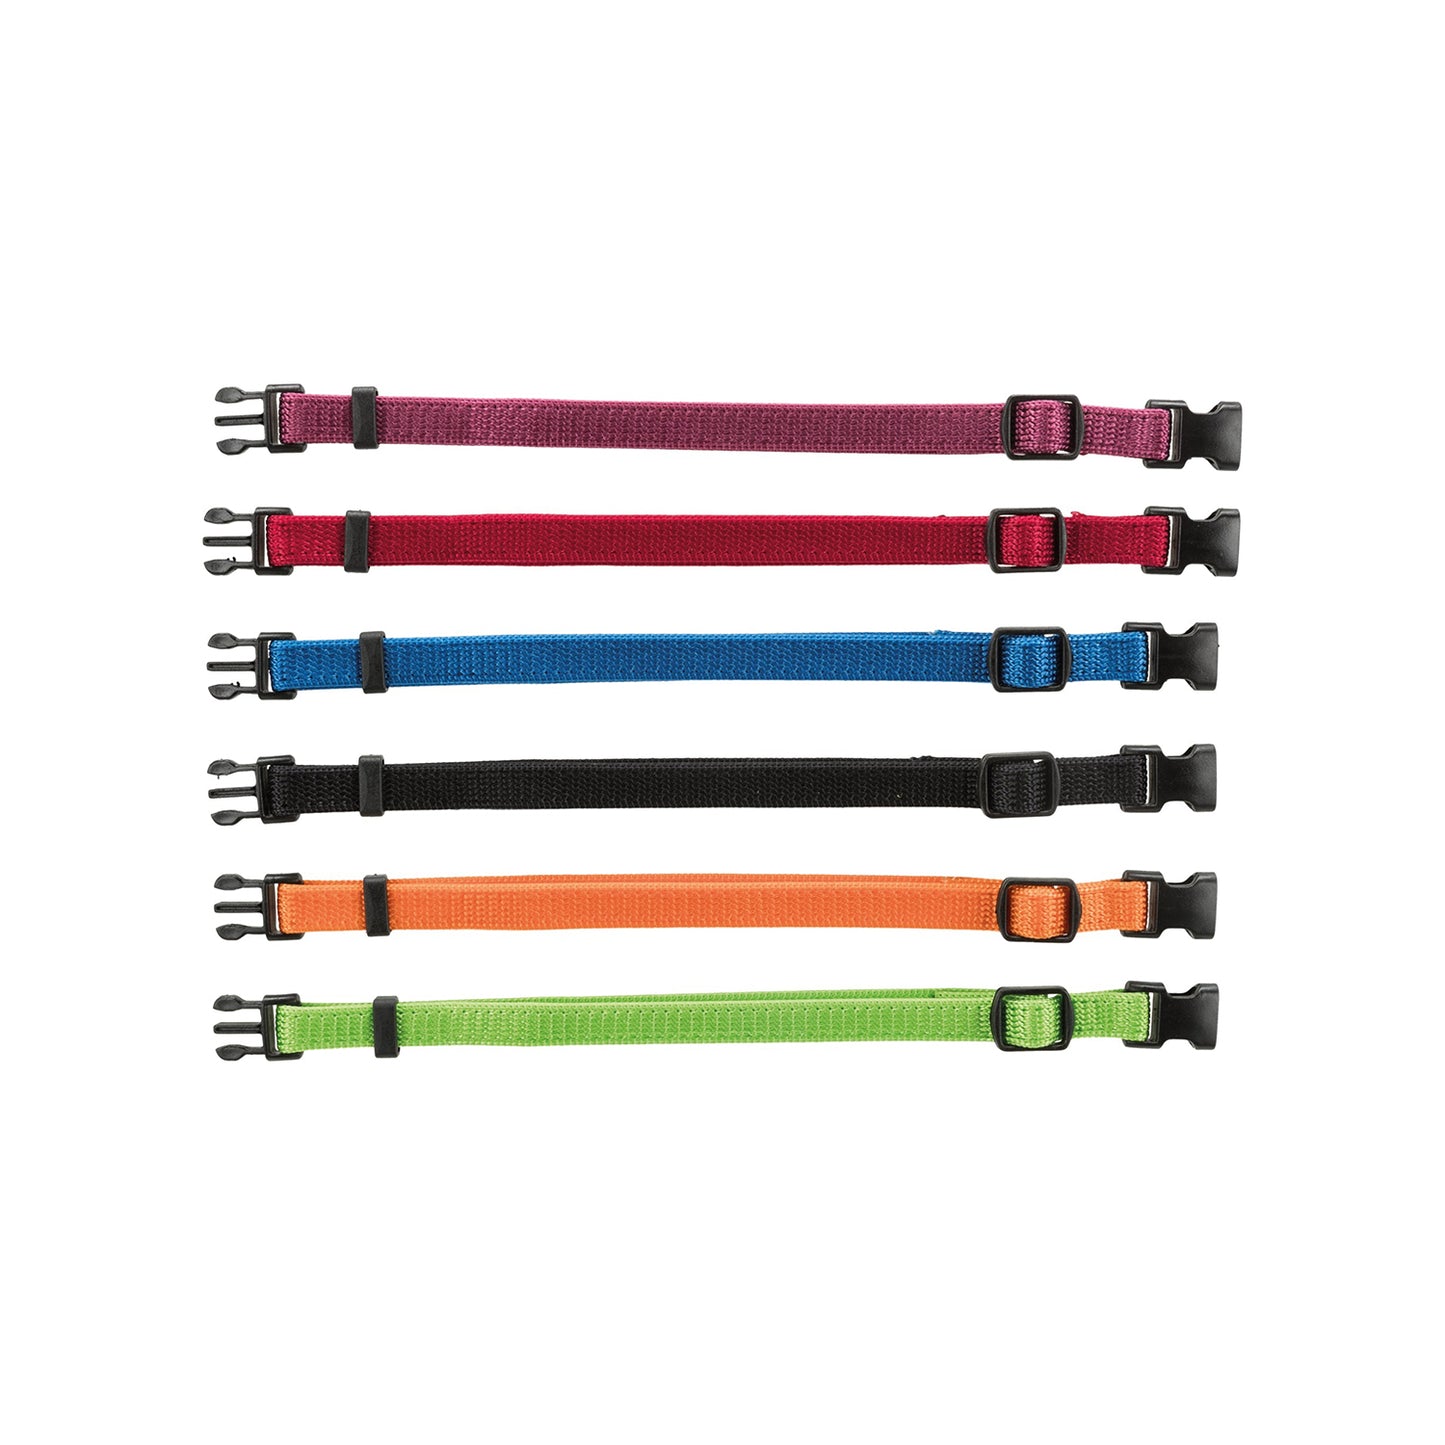 Trixie - Set of 6 Puppy Collars